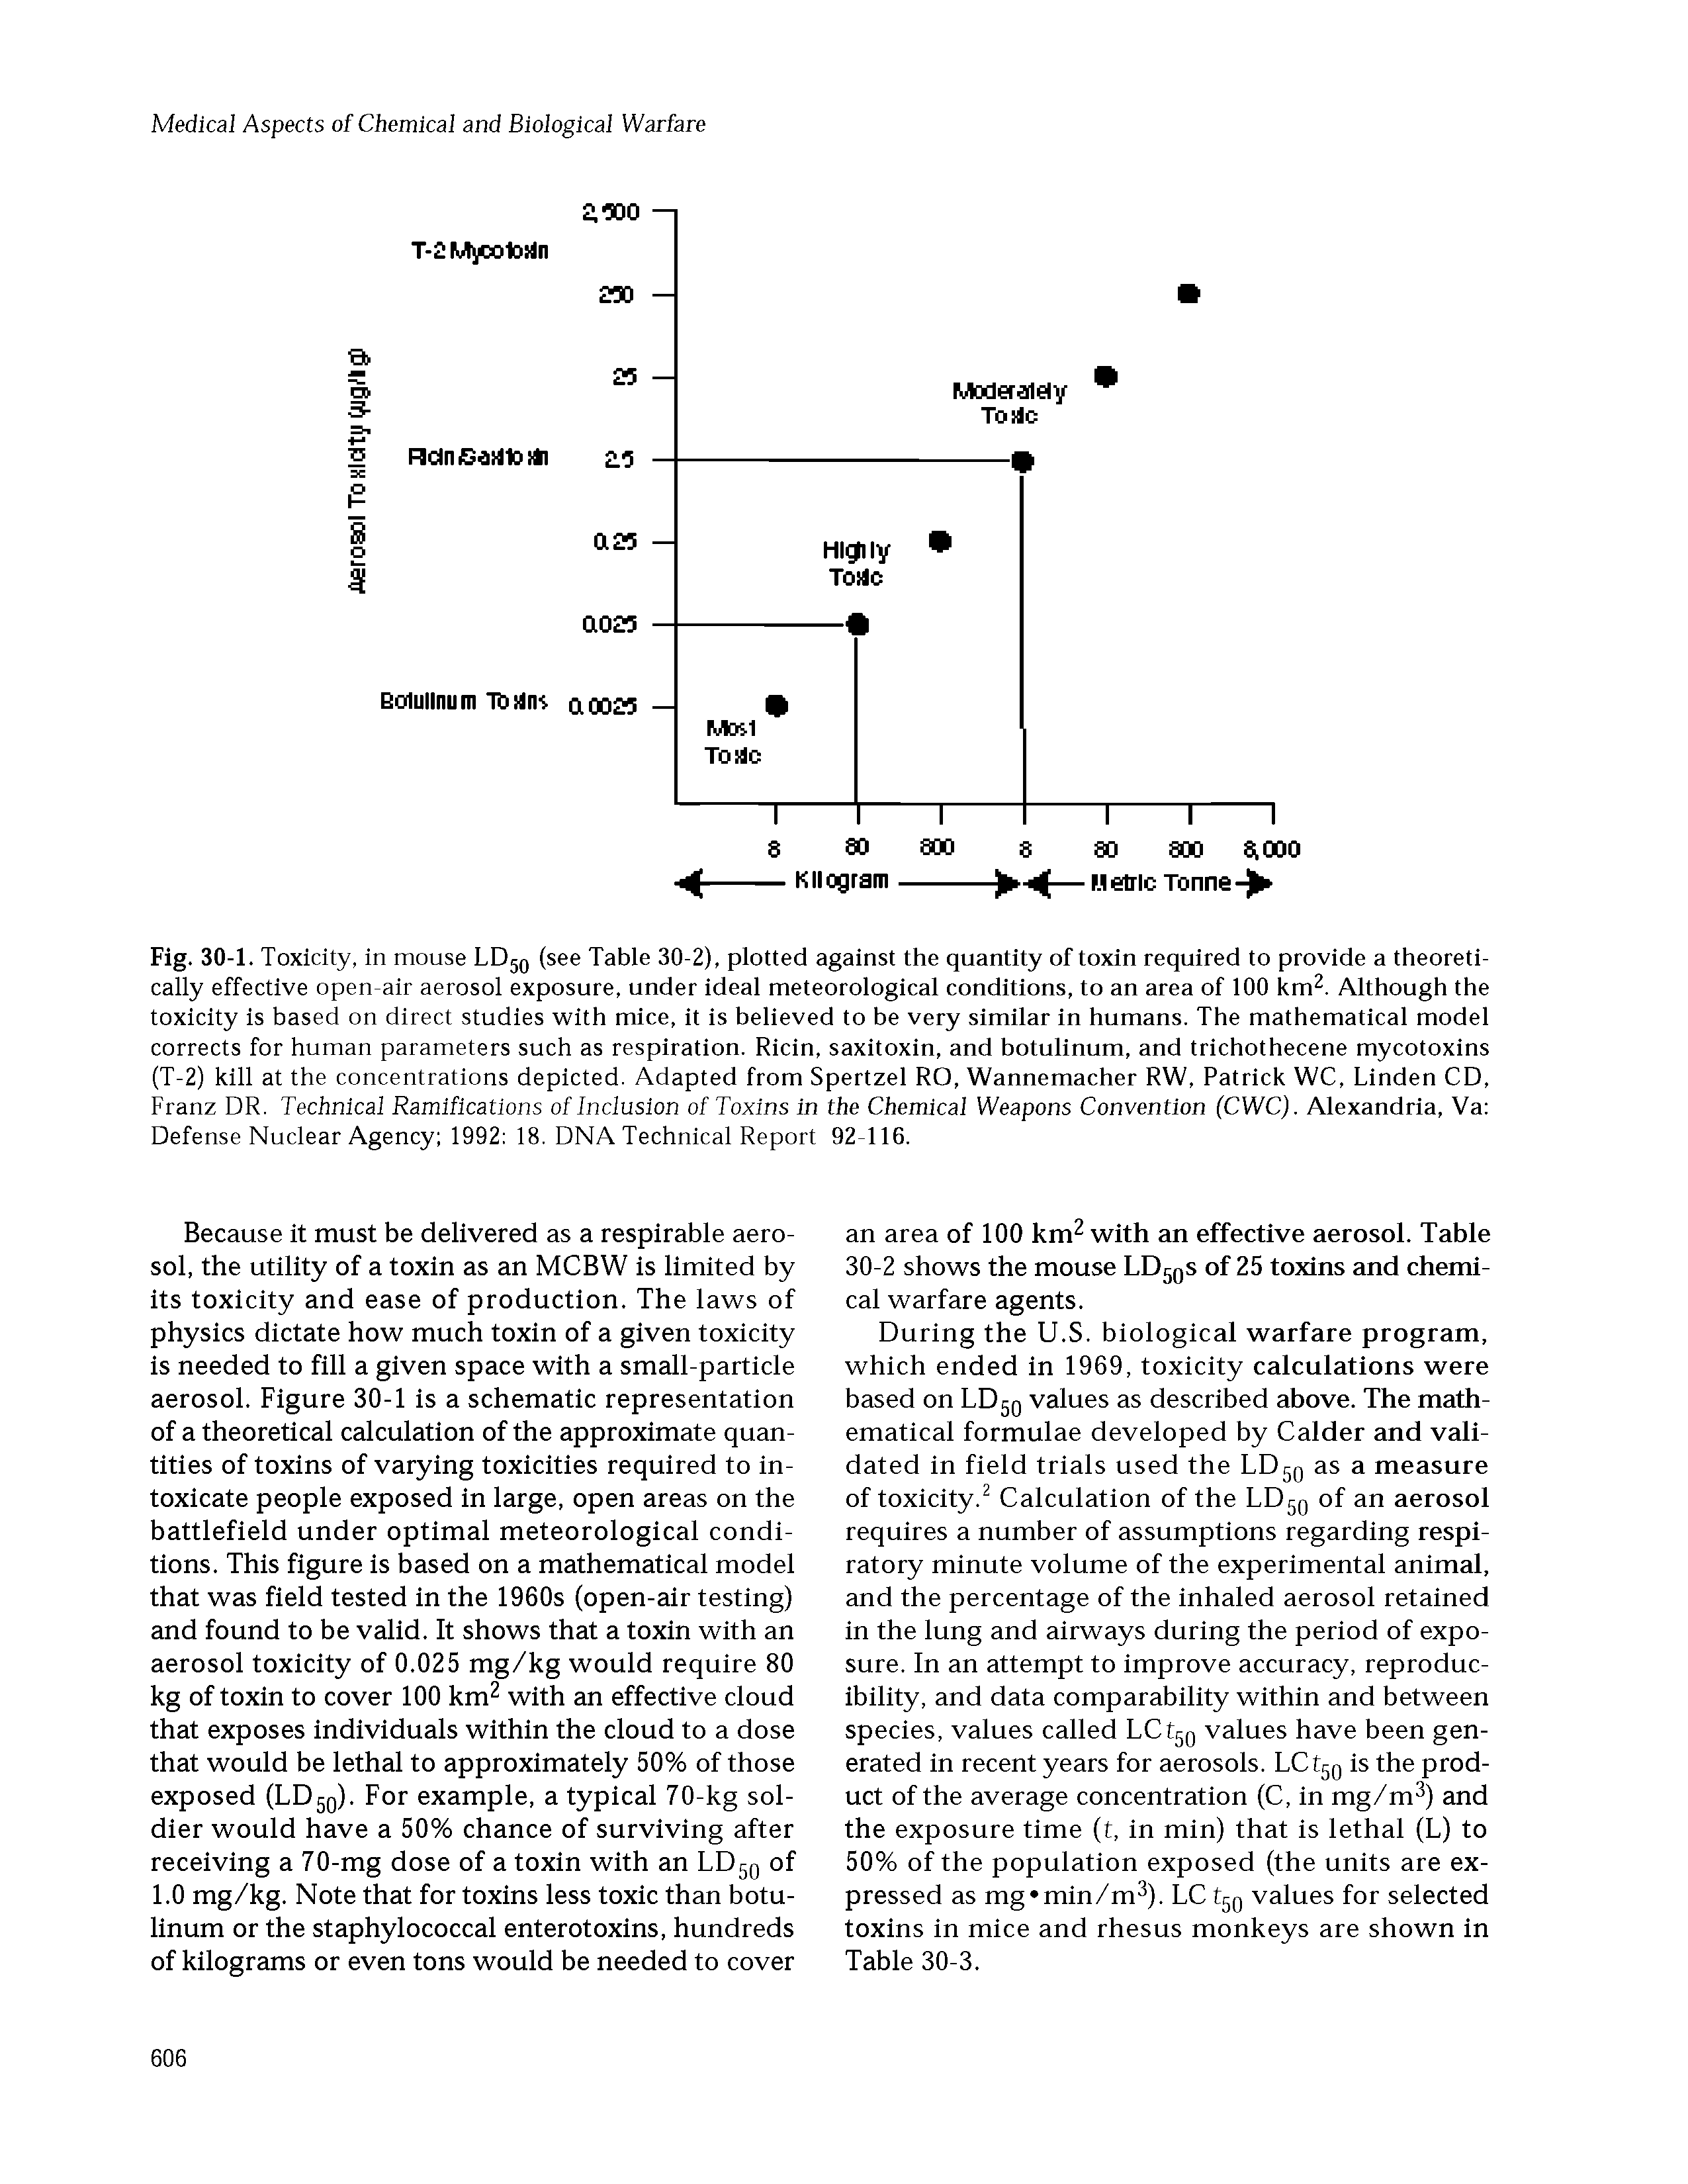 Fig. 30-1. Toxicity, in mouse LD50 (see Table 30-2), plotted against the quantity of toxin required to provide a theoretically effective open-air aerosol exposure, under ideal meteorological conditions, to an area of 100 km2. Although the toxicity is based on direct studies with mice, it is believed to be very similar in humans. The mathematical model corrects for human parameters such as respiration. Ricin, saxitoxin, and botulinum, and trichothecene mycotoxins (T-2) kill at the concentrations depicted. Adapted from Spertzel RO, Wannemacher RW, Patrick WC, Linden CD, Franz DR. Technical Ramifications of Inclusion of Toxins in the Chemical Weapons Convention (CWC). Alexandria, Va Defense Nuclear Agency 1992 18. DNA Technical Report 92-116.